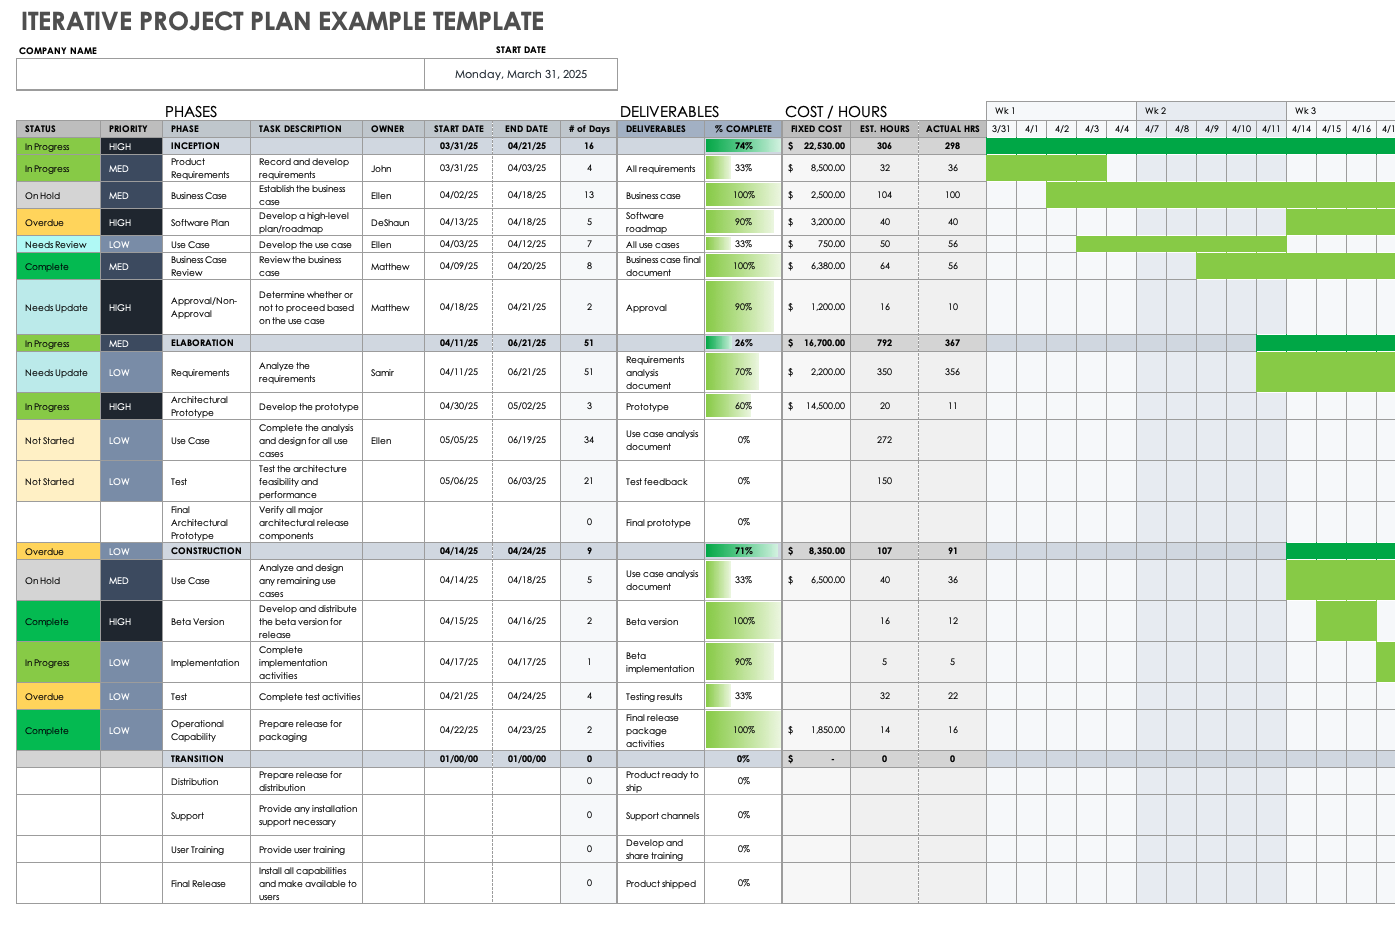 Iterative Project Plan Example Template